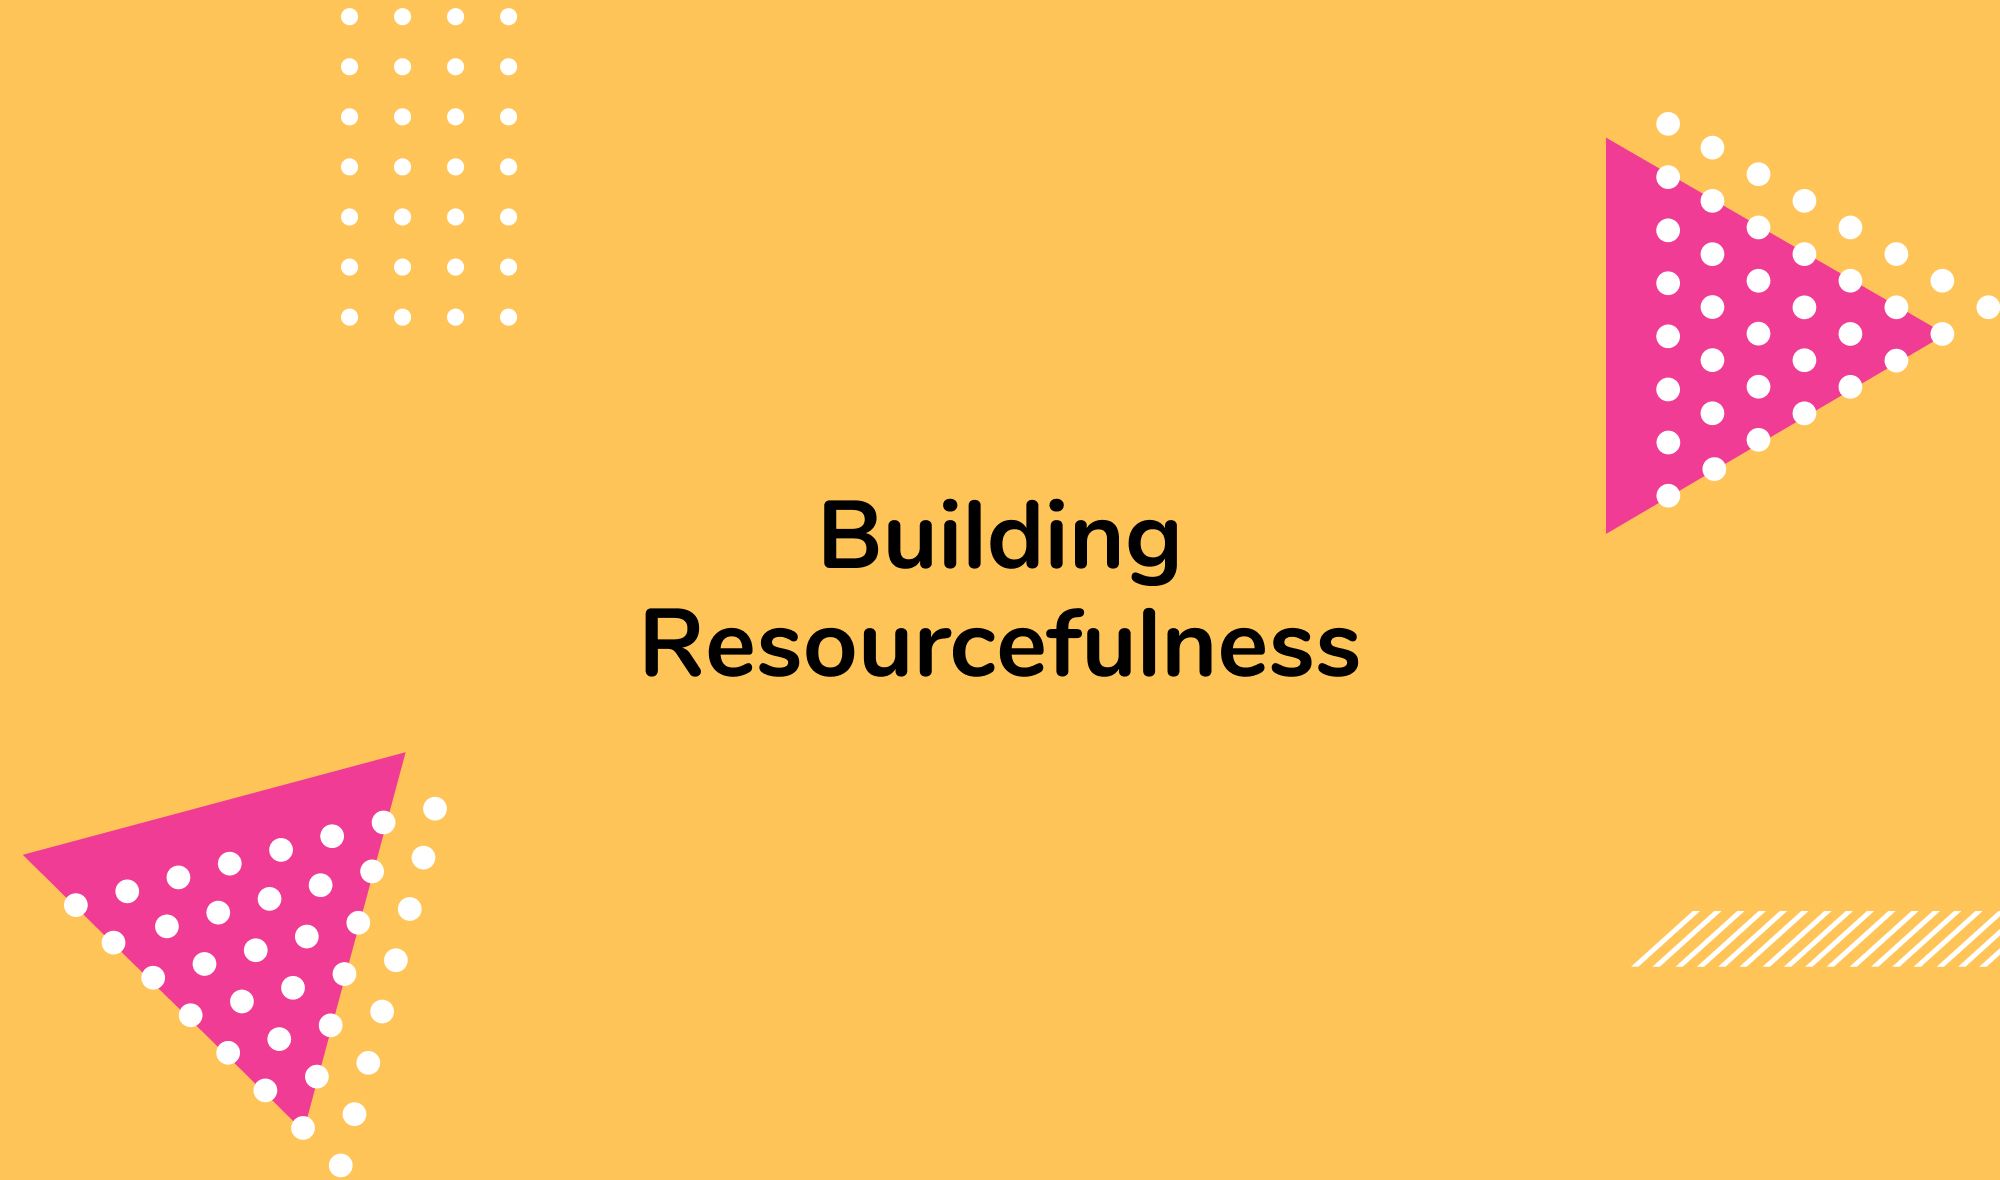 Building Resourcefulness through Innovative Solutions